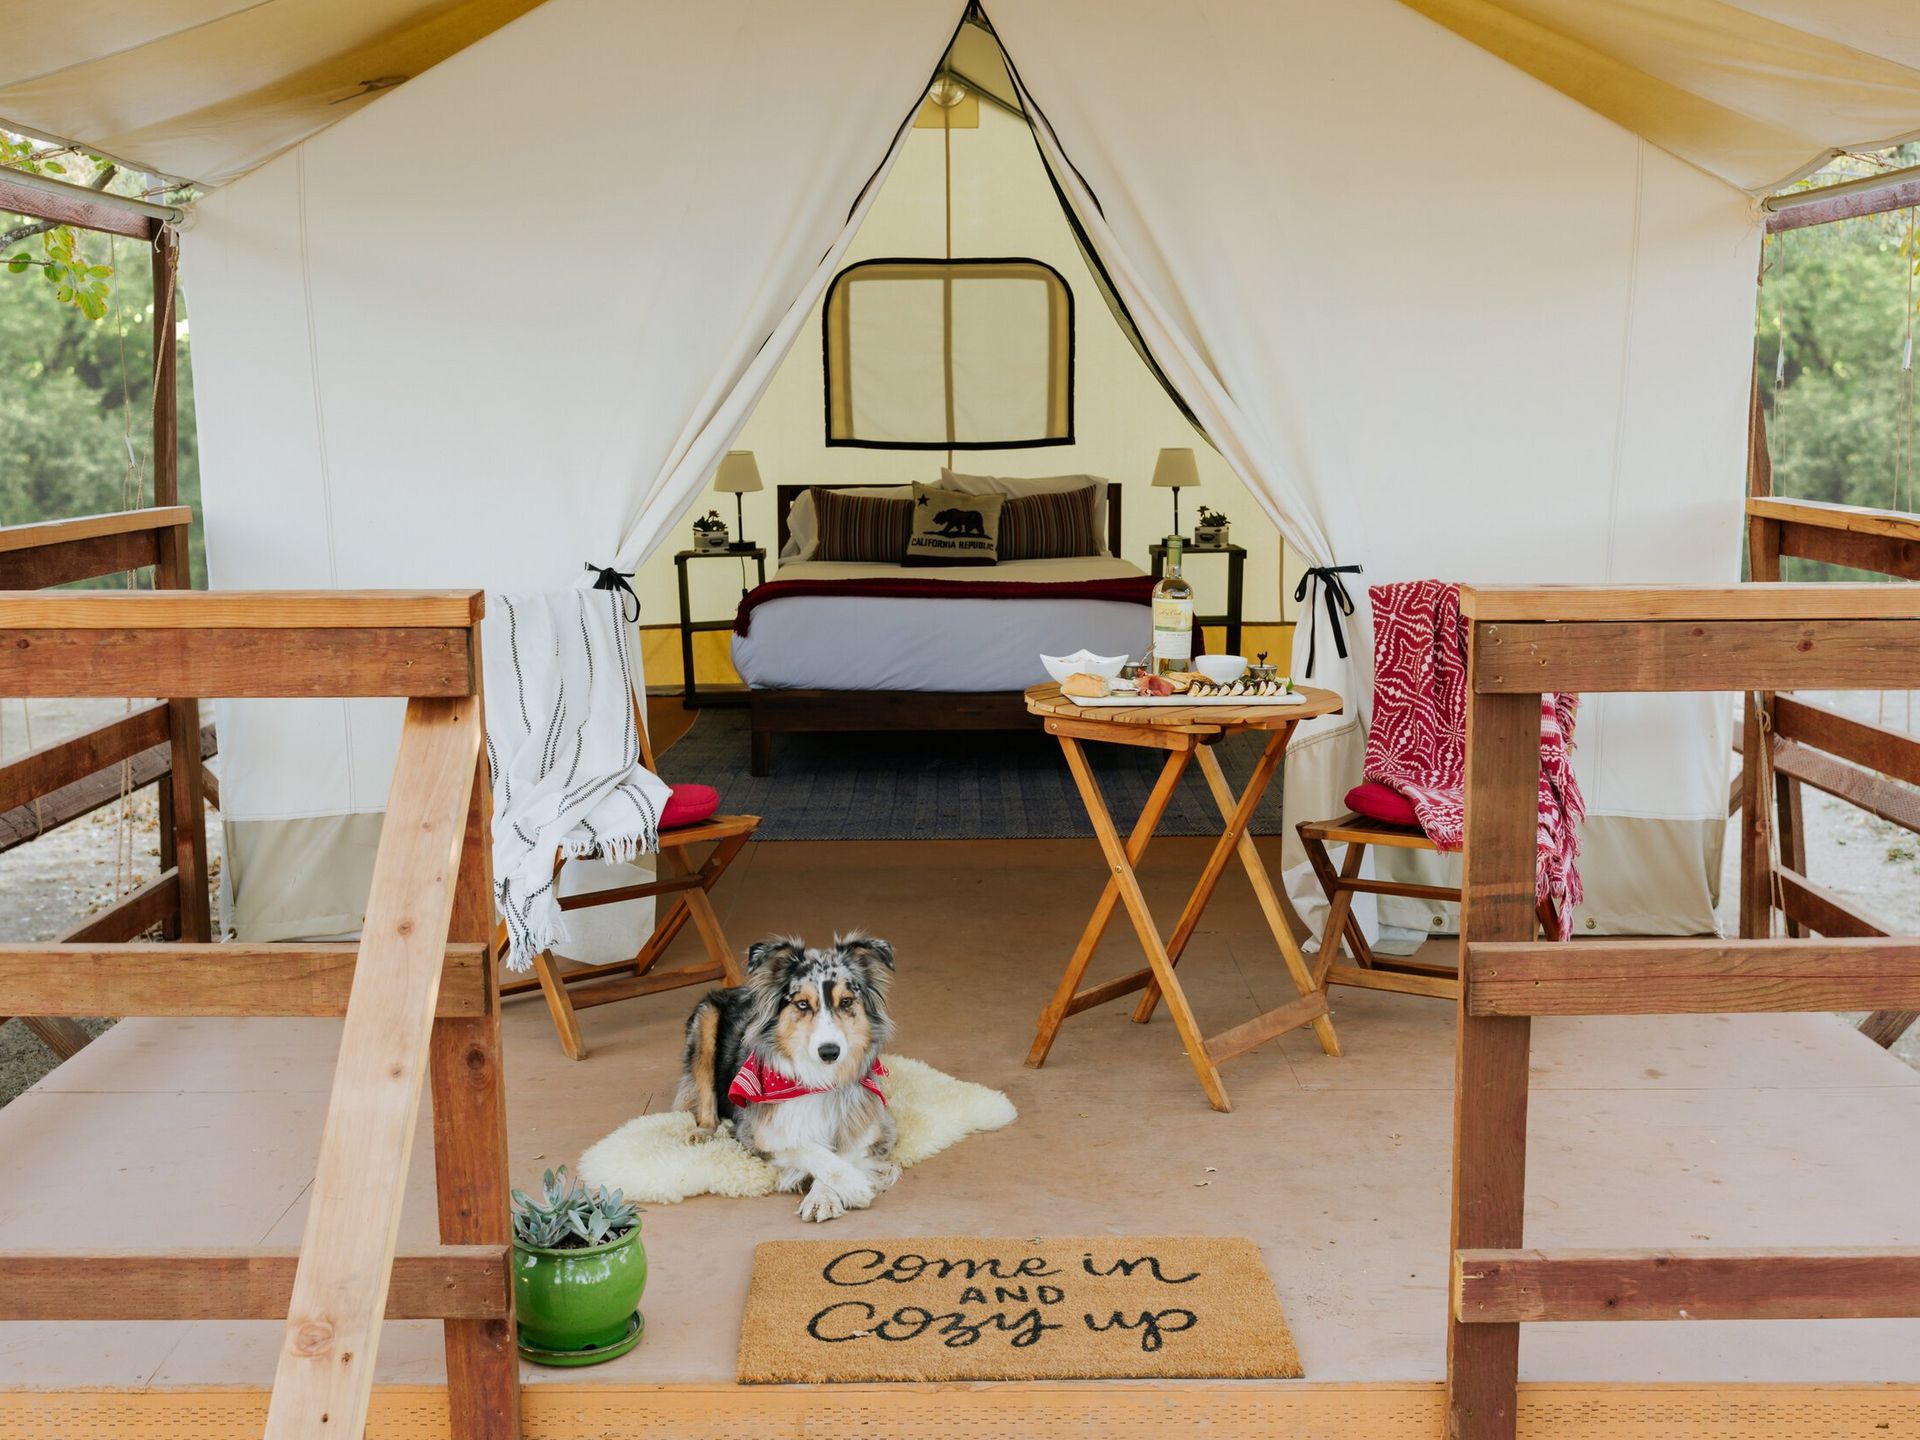 spacious tents and heated beds - Wildhaven Yosemite Glamping